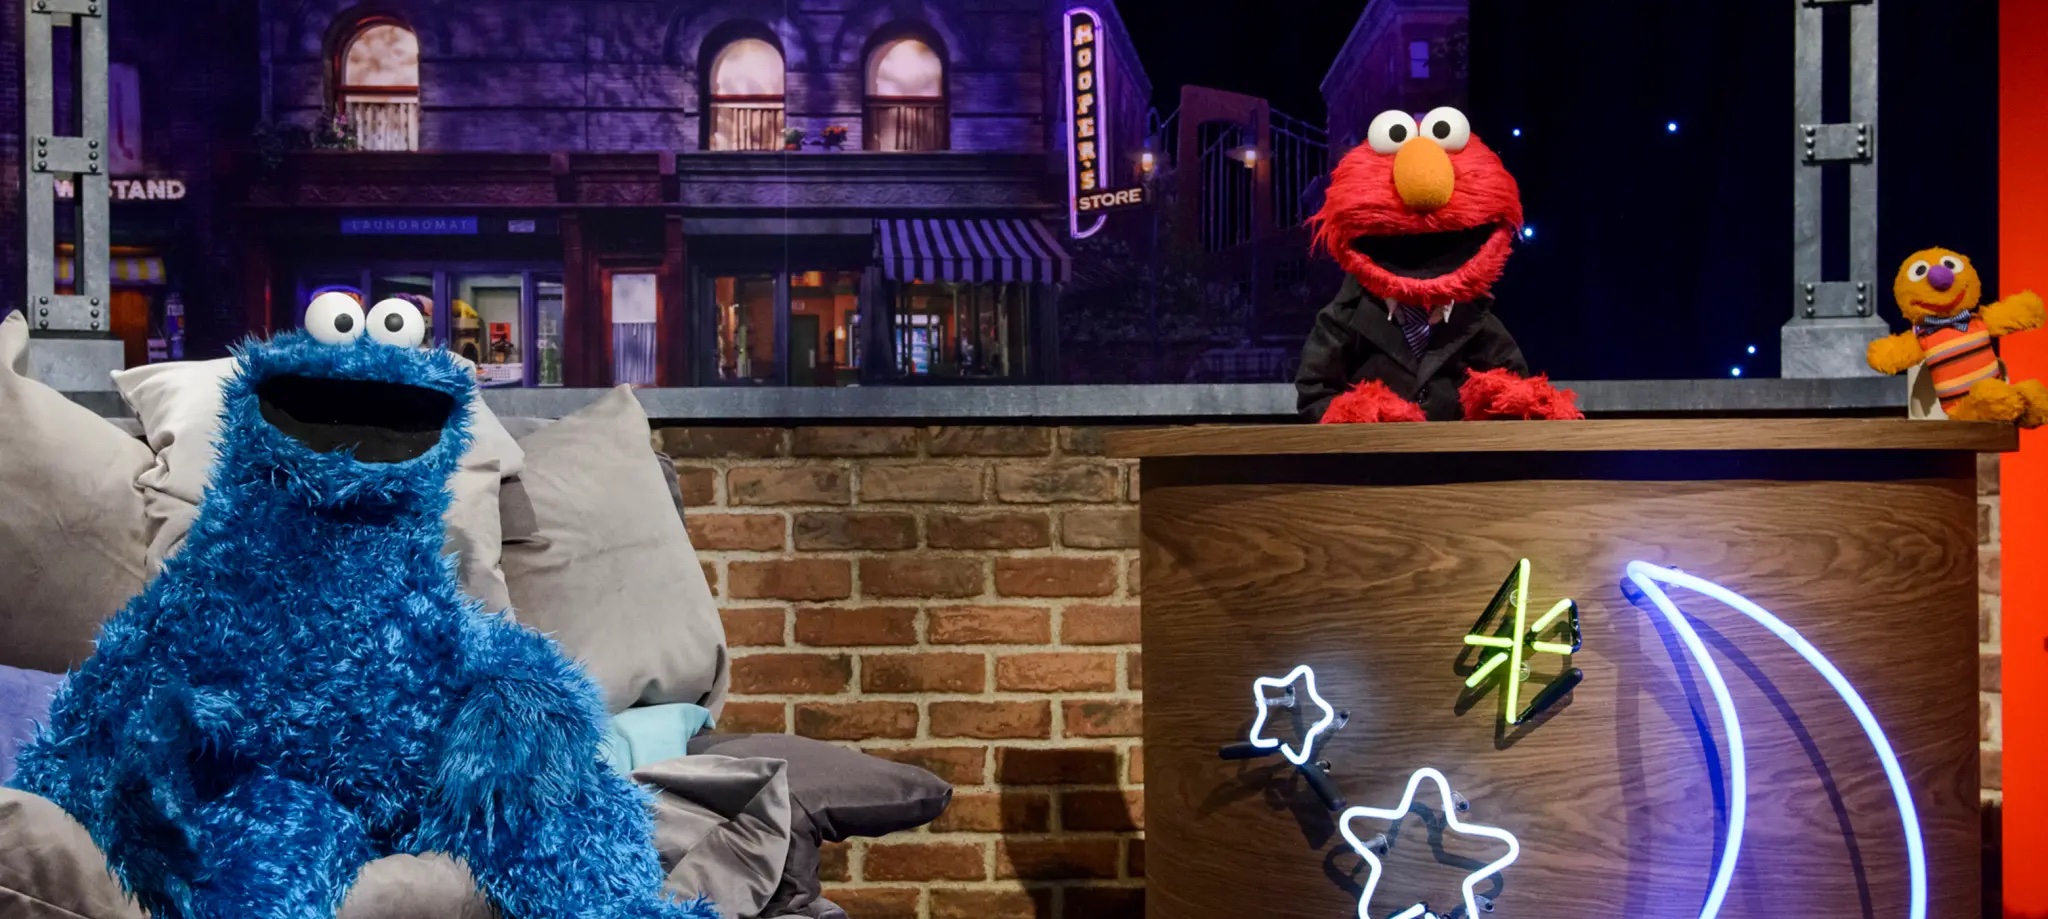 Elmo sits and a desk, and Cookie Monster sits next to him on a couch.